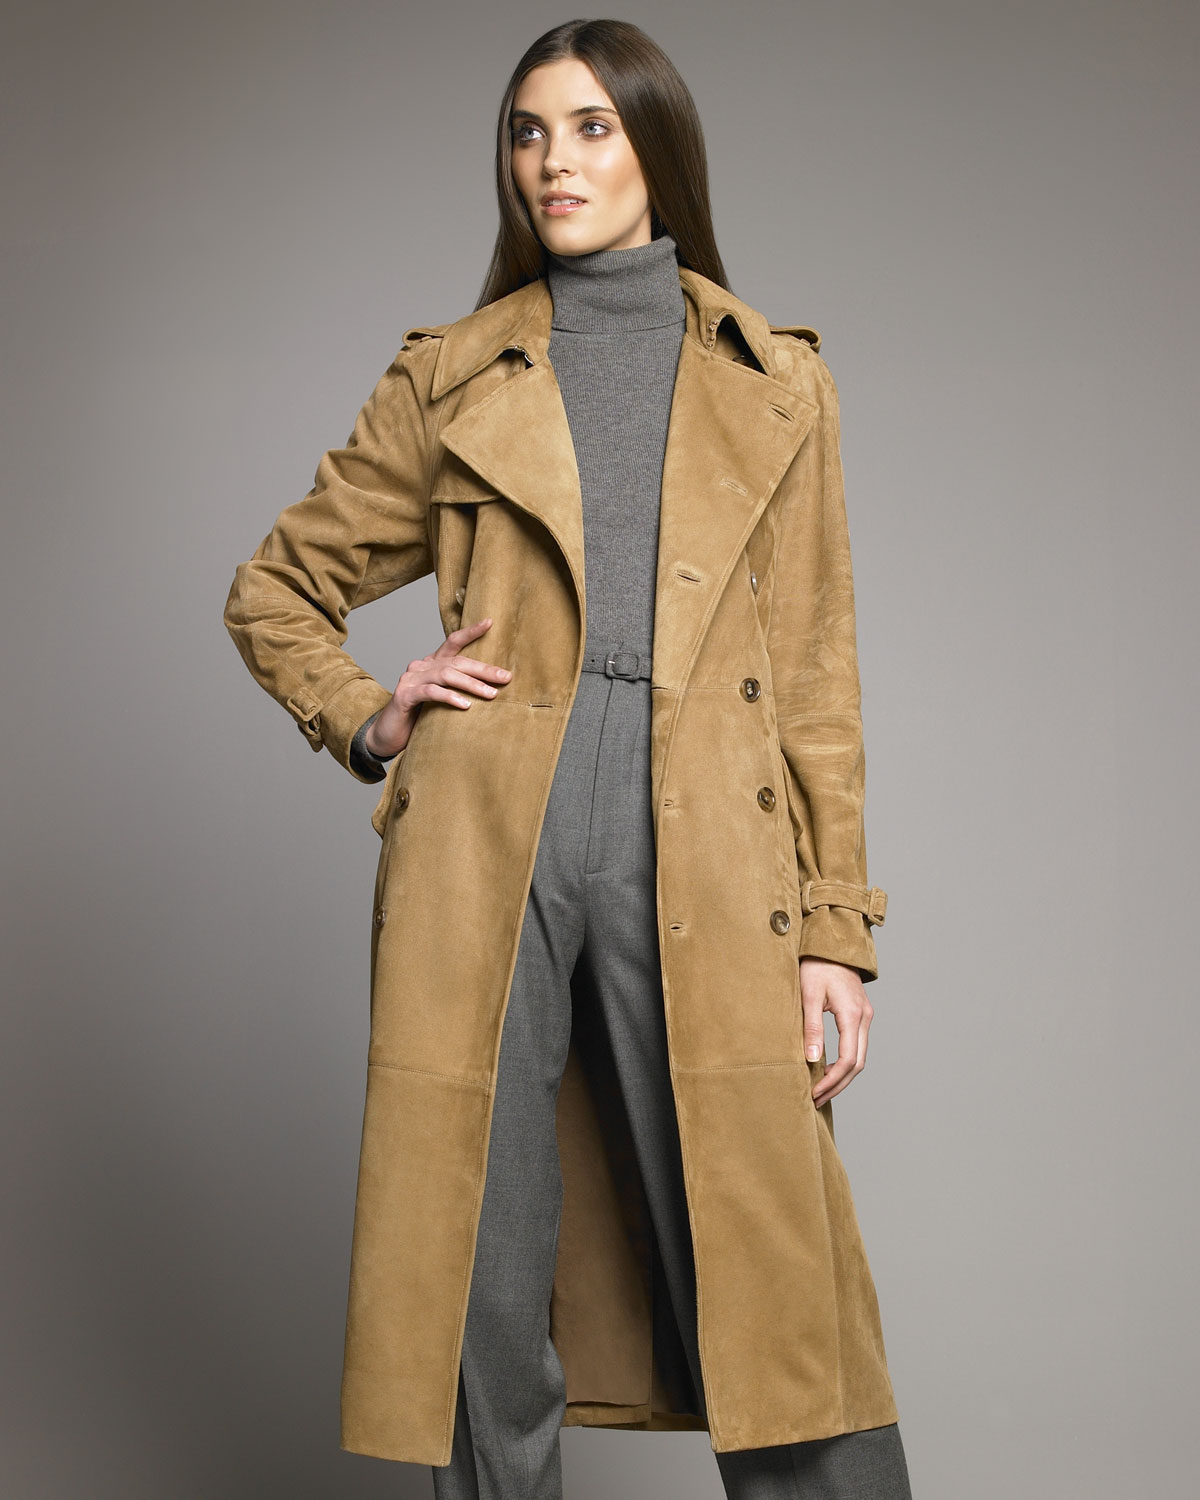 Ralph Lauren Collection Alana Suede Trench in Camel (Brown) - Lyst